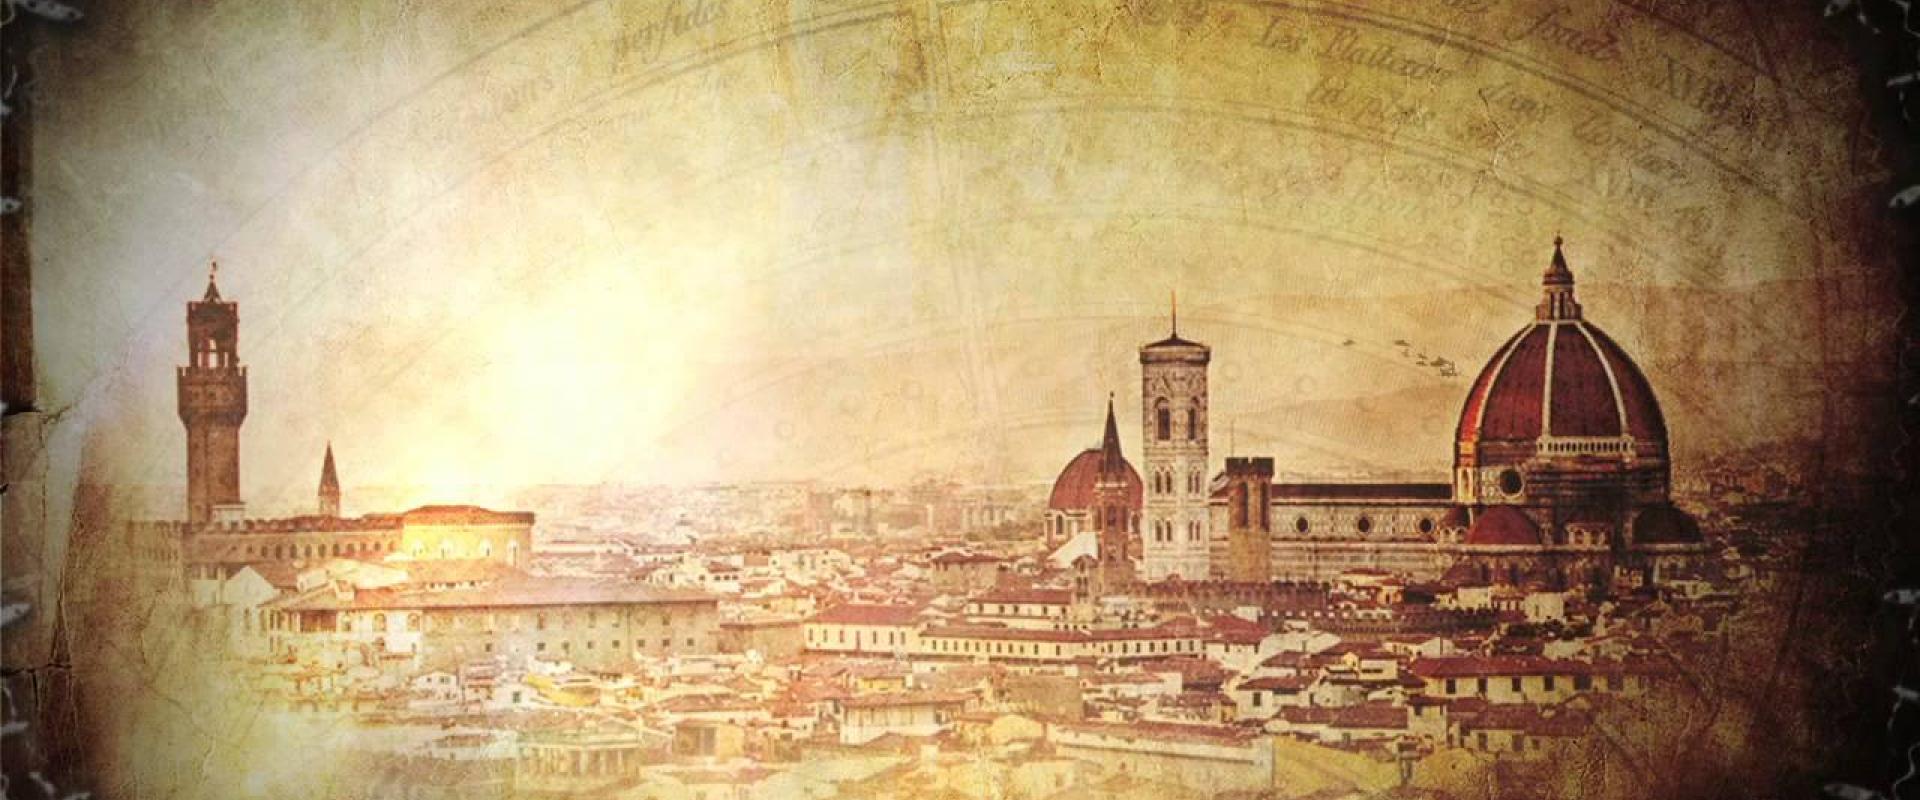 Guided Tour of Florence The misteries of the “Inferno of Dan Brown” + Boboli gardens